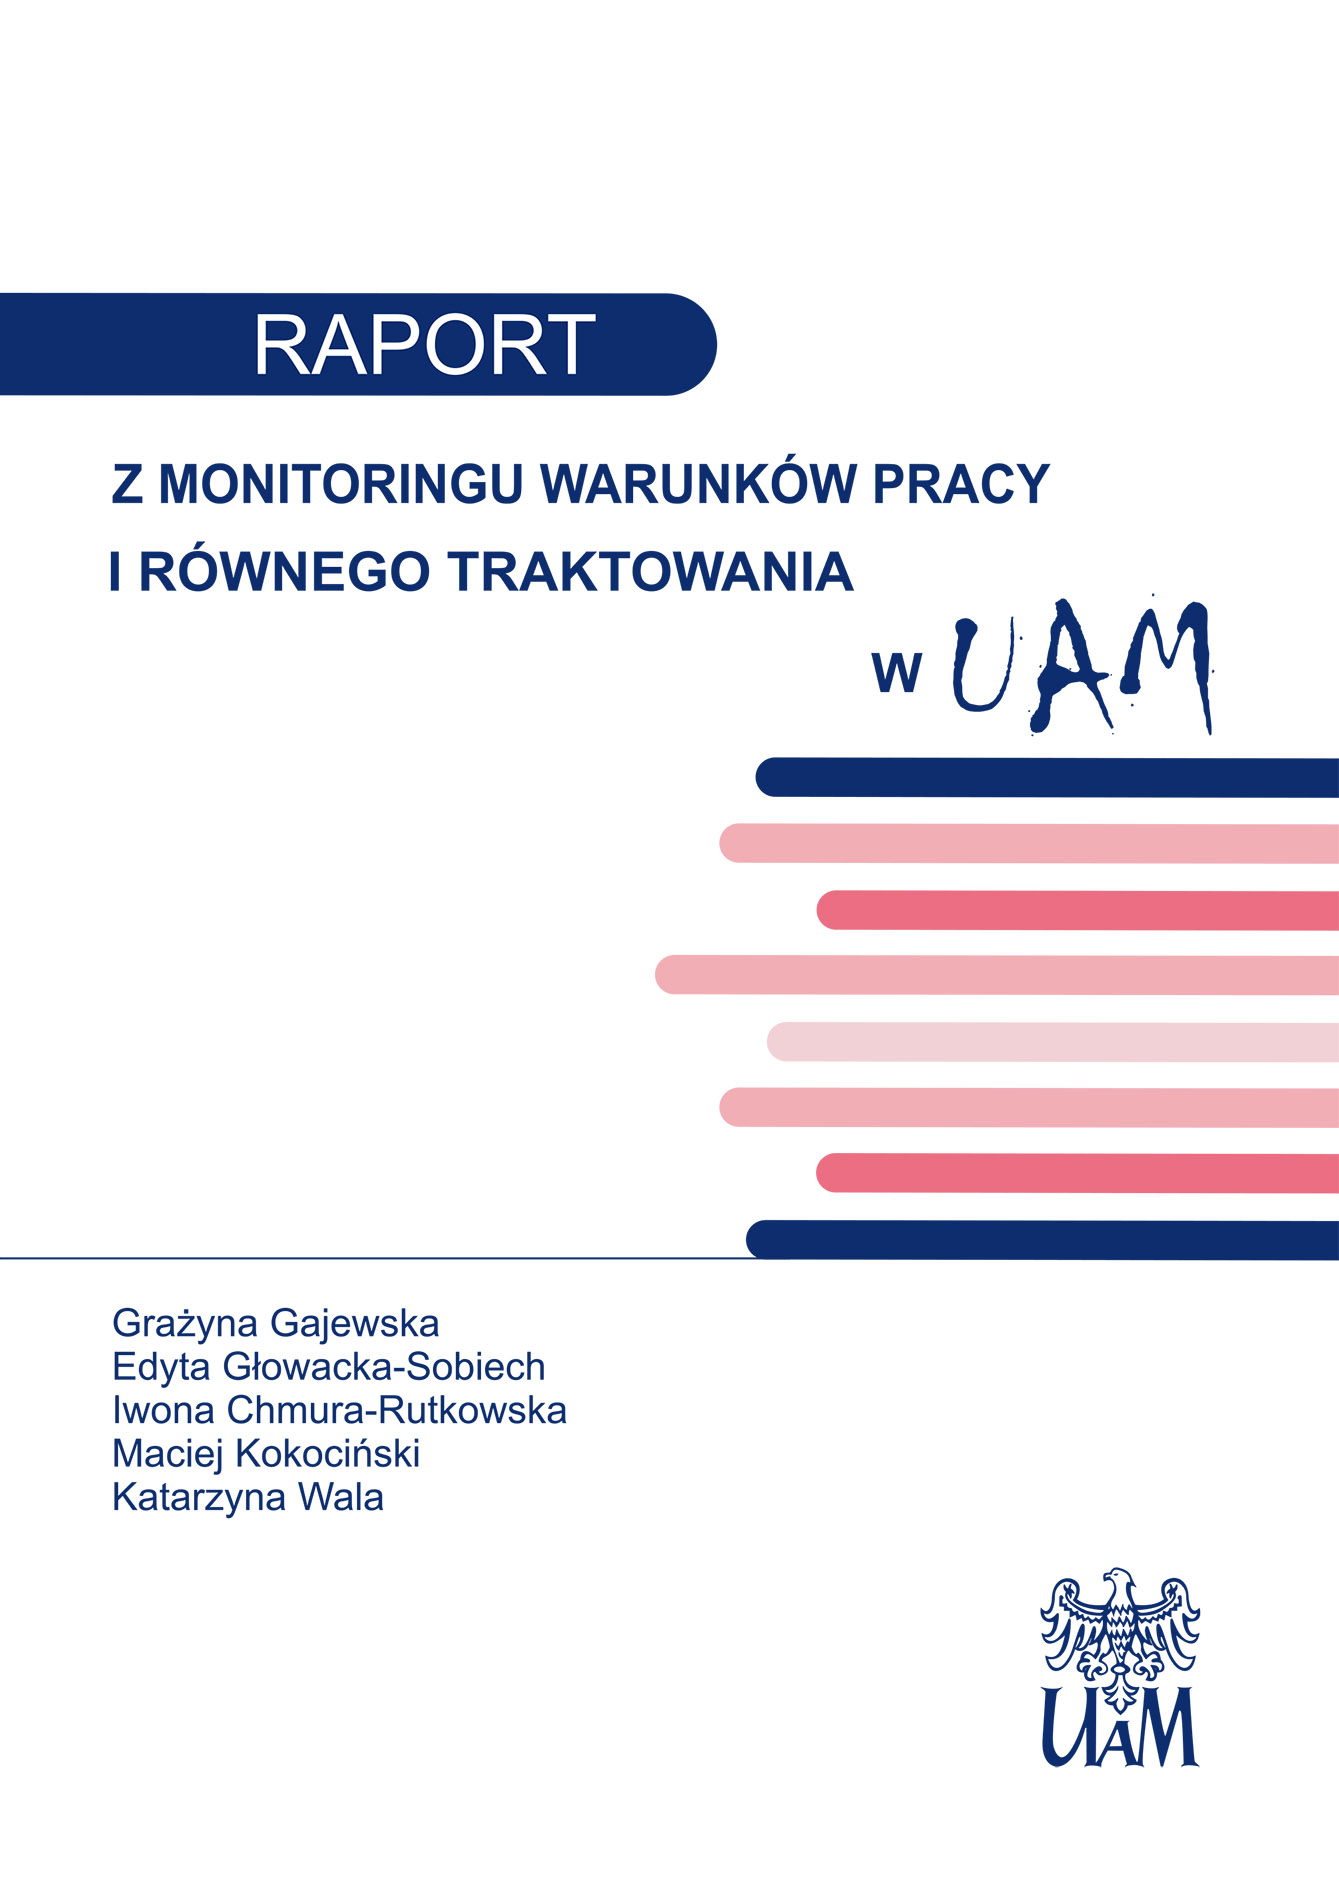 REPORT on monitoring working conditions and equal treatment at Adam Mickiewicz University Cover Image